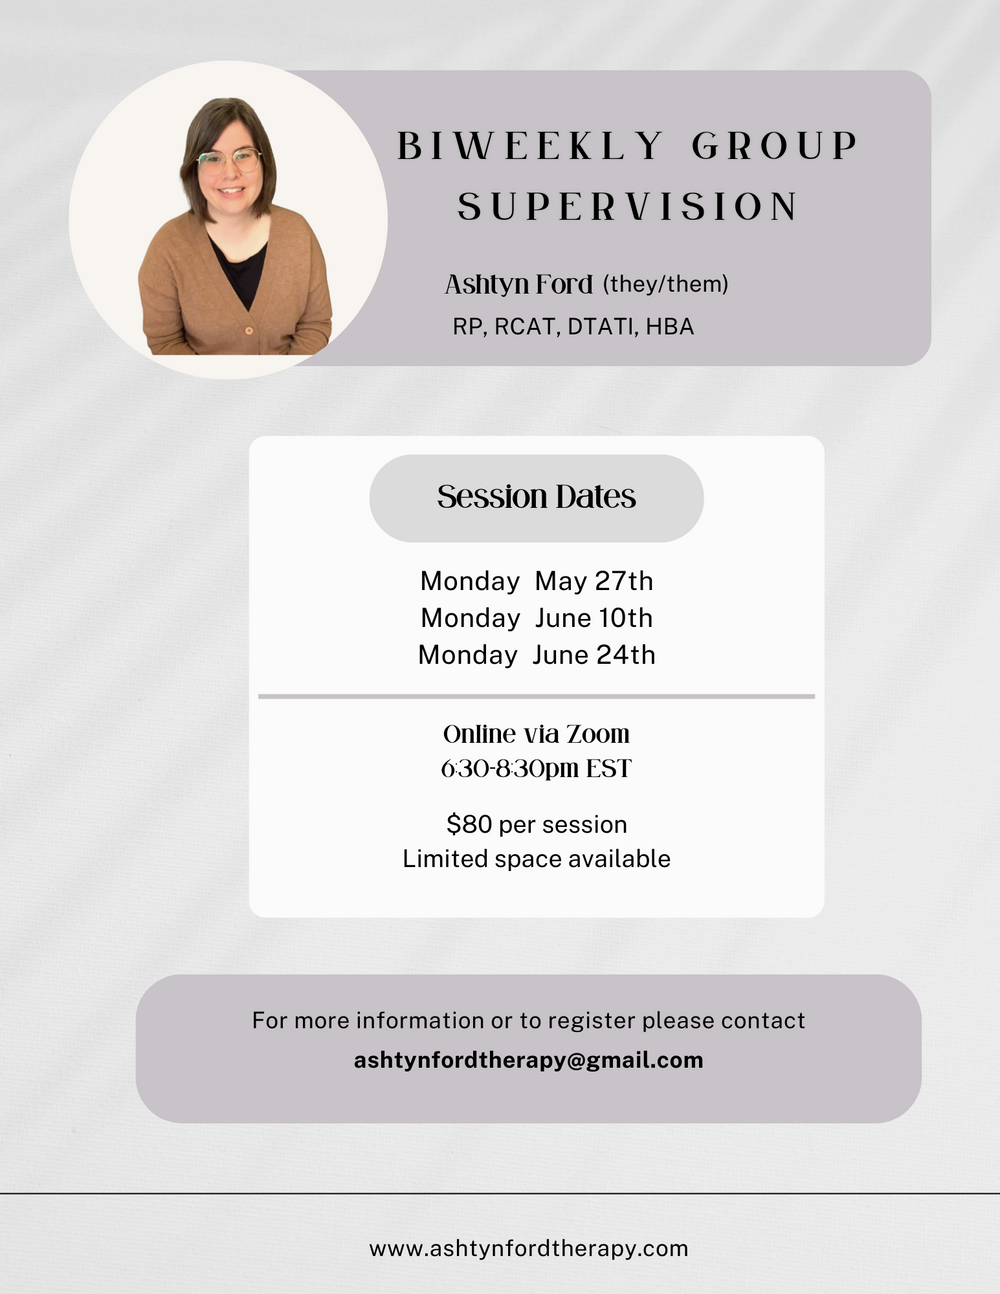 Biweekly Group Supervision May 27th, June 10th & June 24th Monday evenings 6-8pm EST (online)
www.ashtynfordtherapy.com/consultation